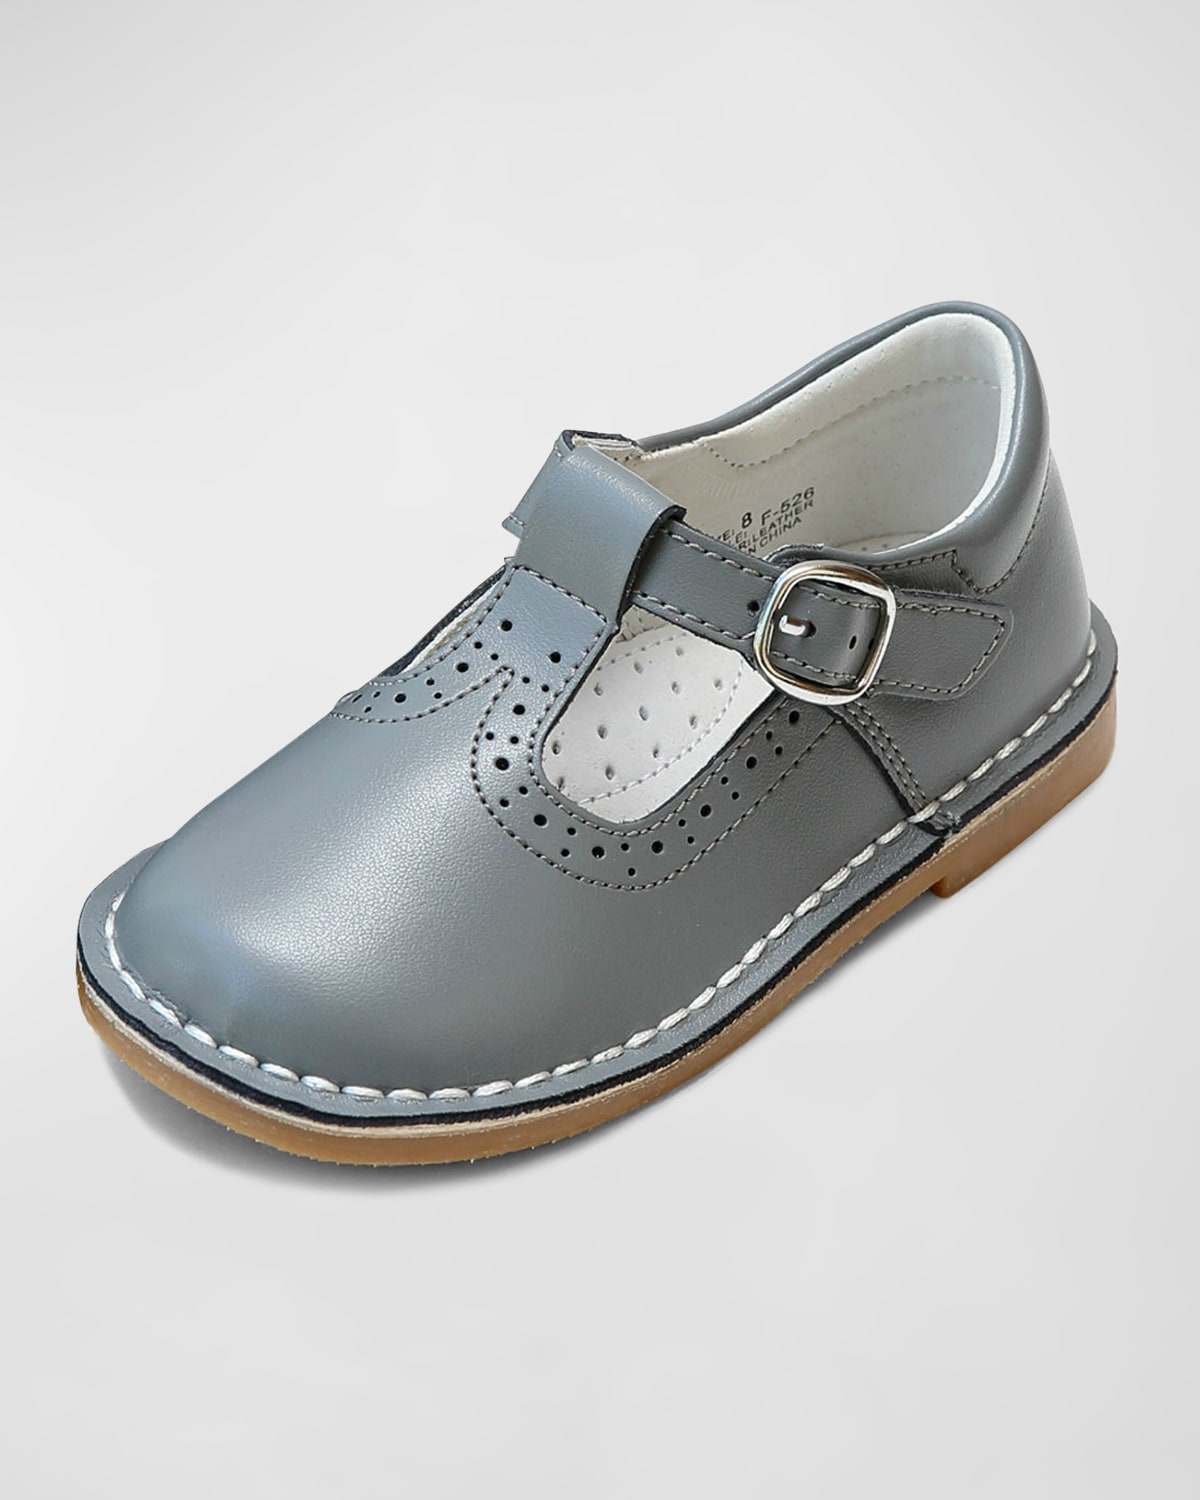 L'amour Shoes Kids' Girl's Frances Metallic T-strap Mary Jane Shoes, Baby/toddlers In Grey